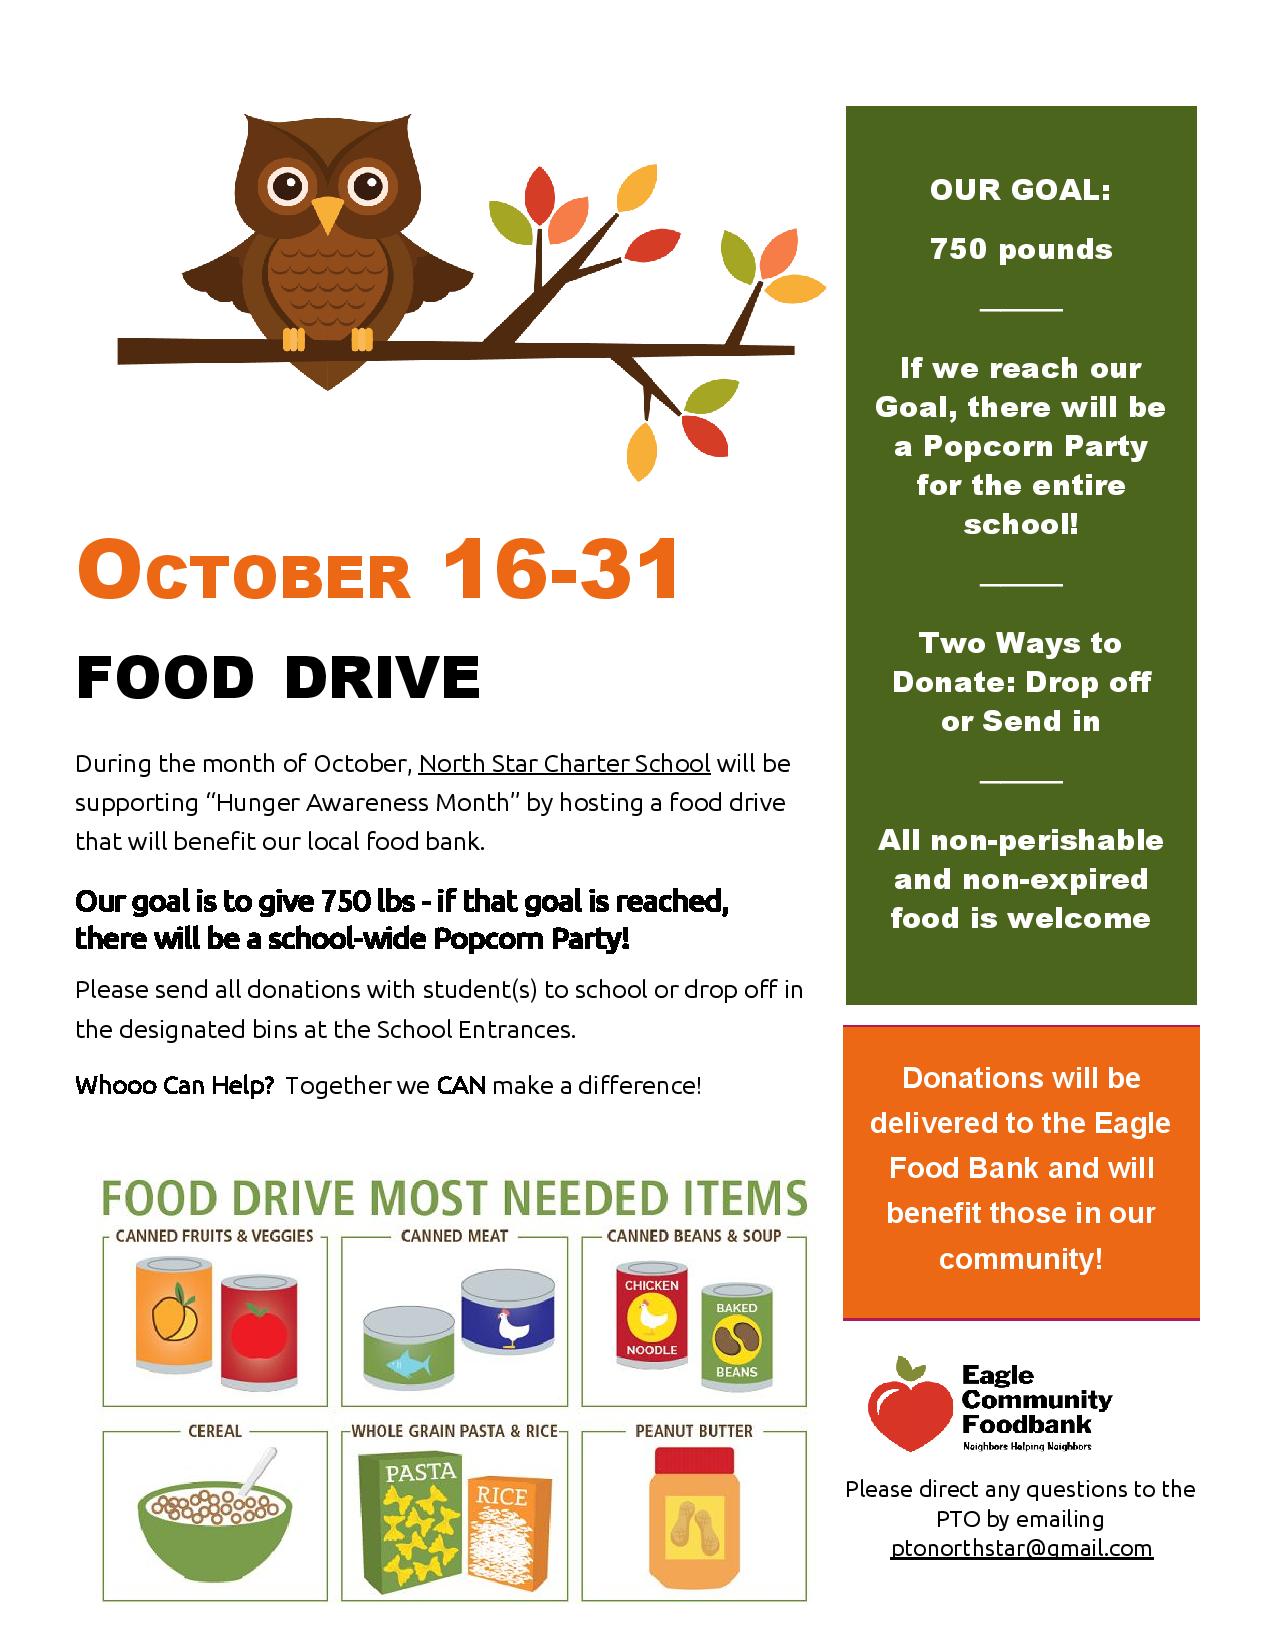 canned food drive flyer template, thanksgiving food drive flyer, school food drive flyer, free food drive flyer template word